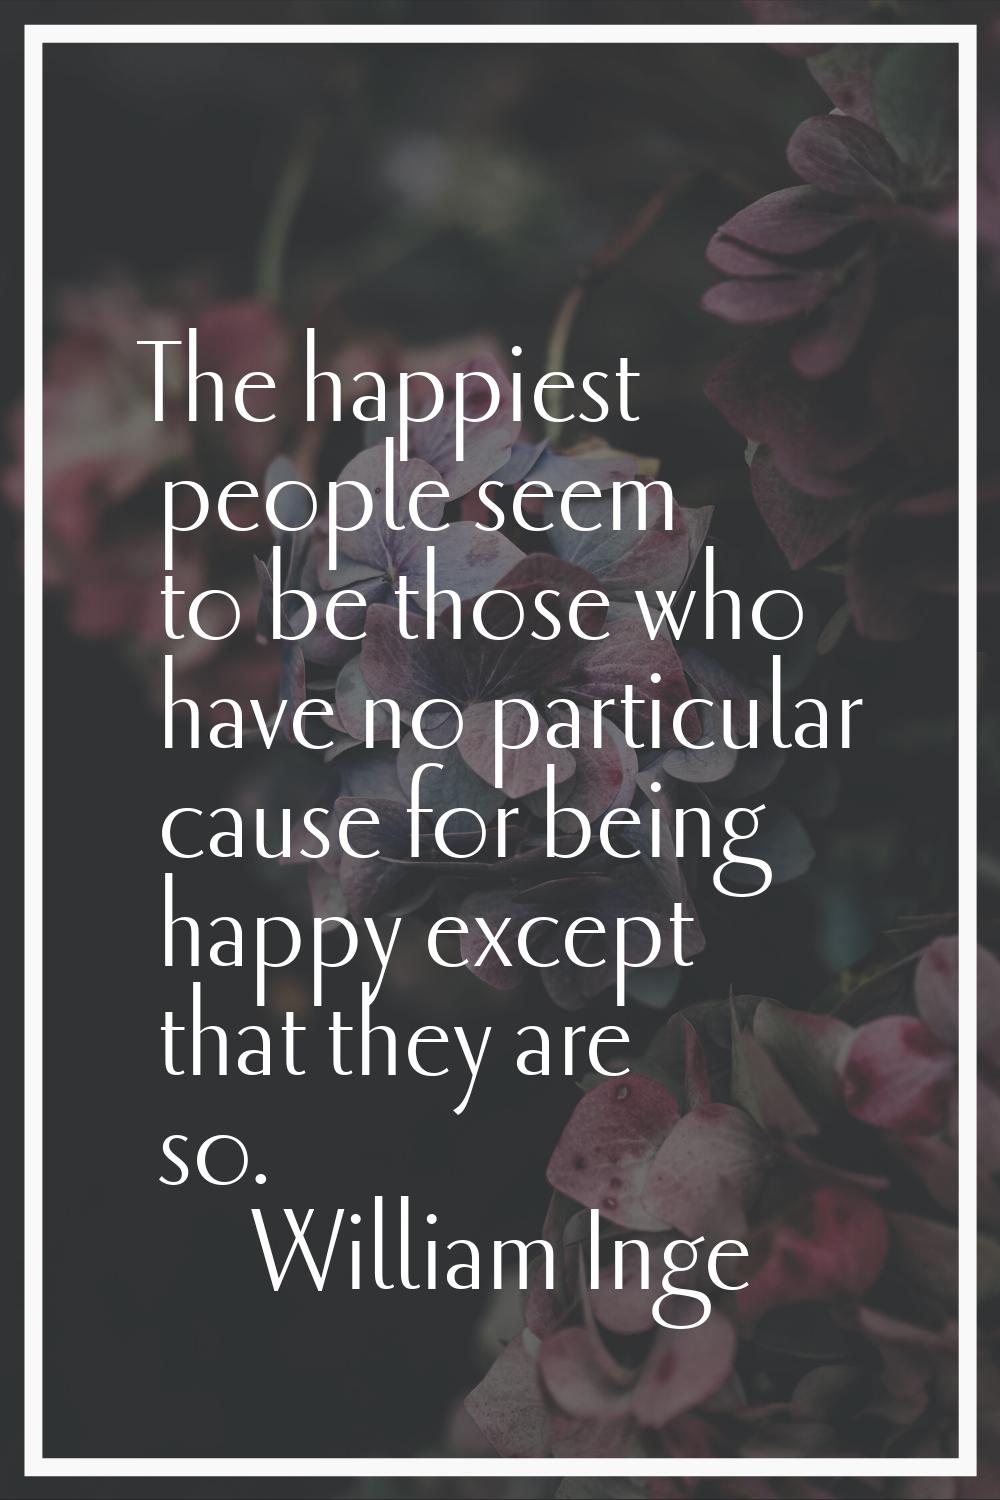 The happiest people seem to be those who have no particular cause for being happy except that they 